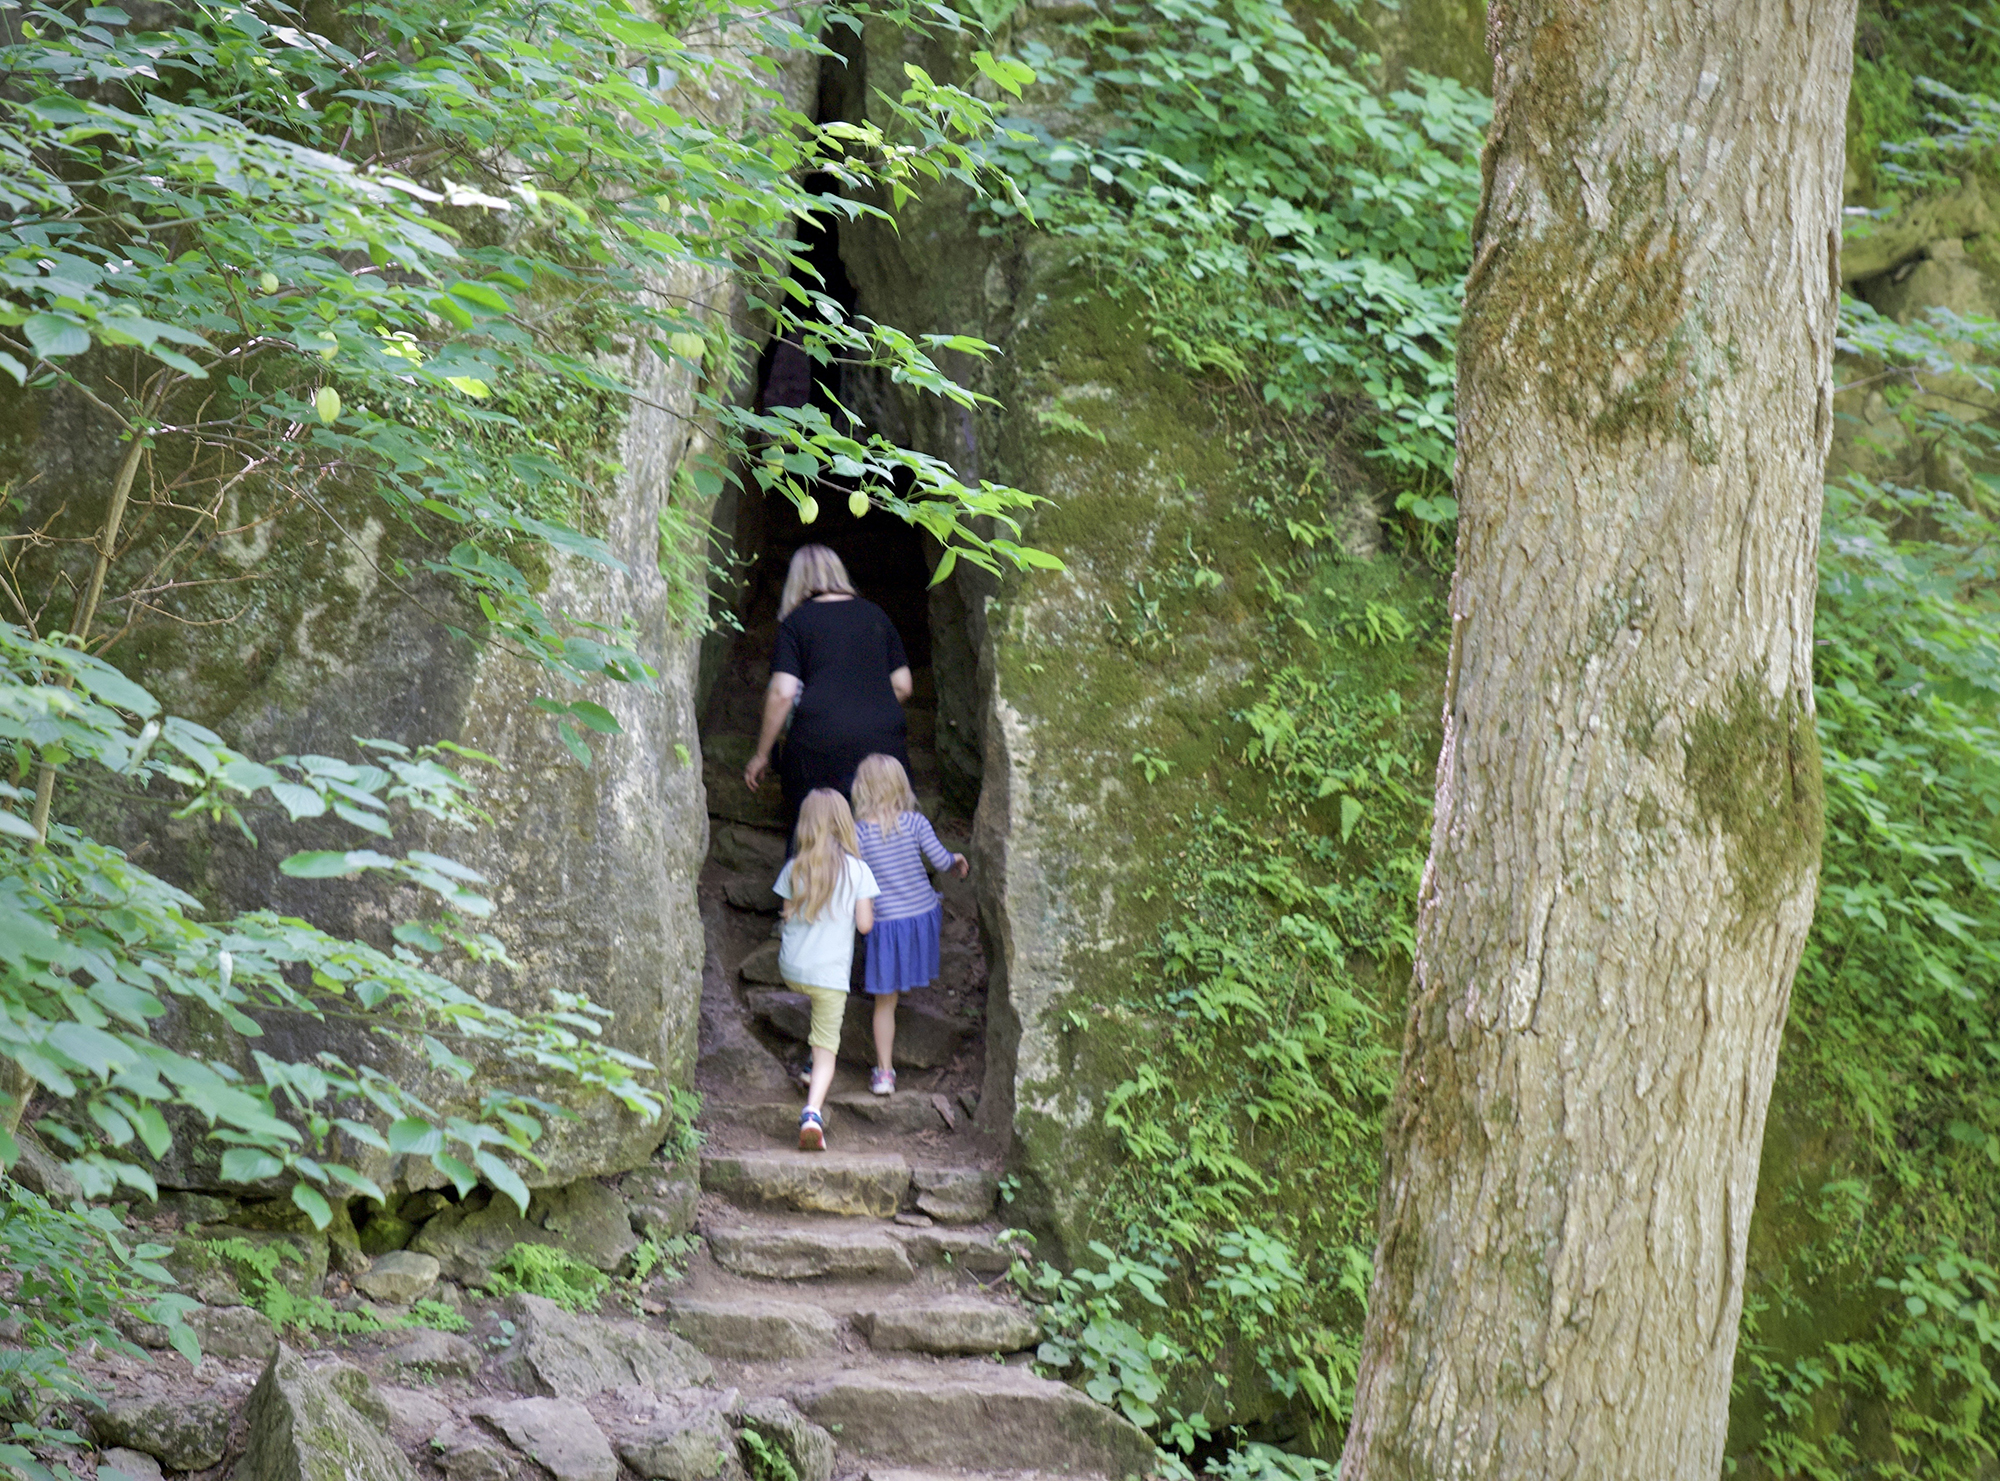 Two kids and an adult entering a cave.